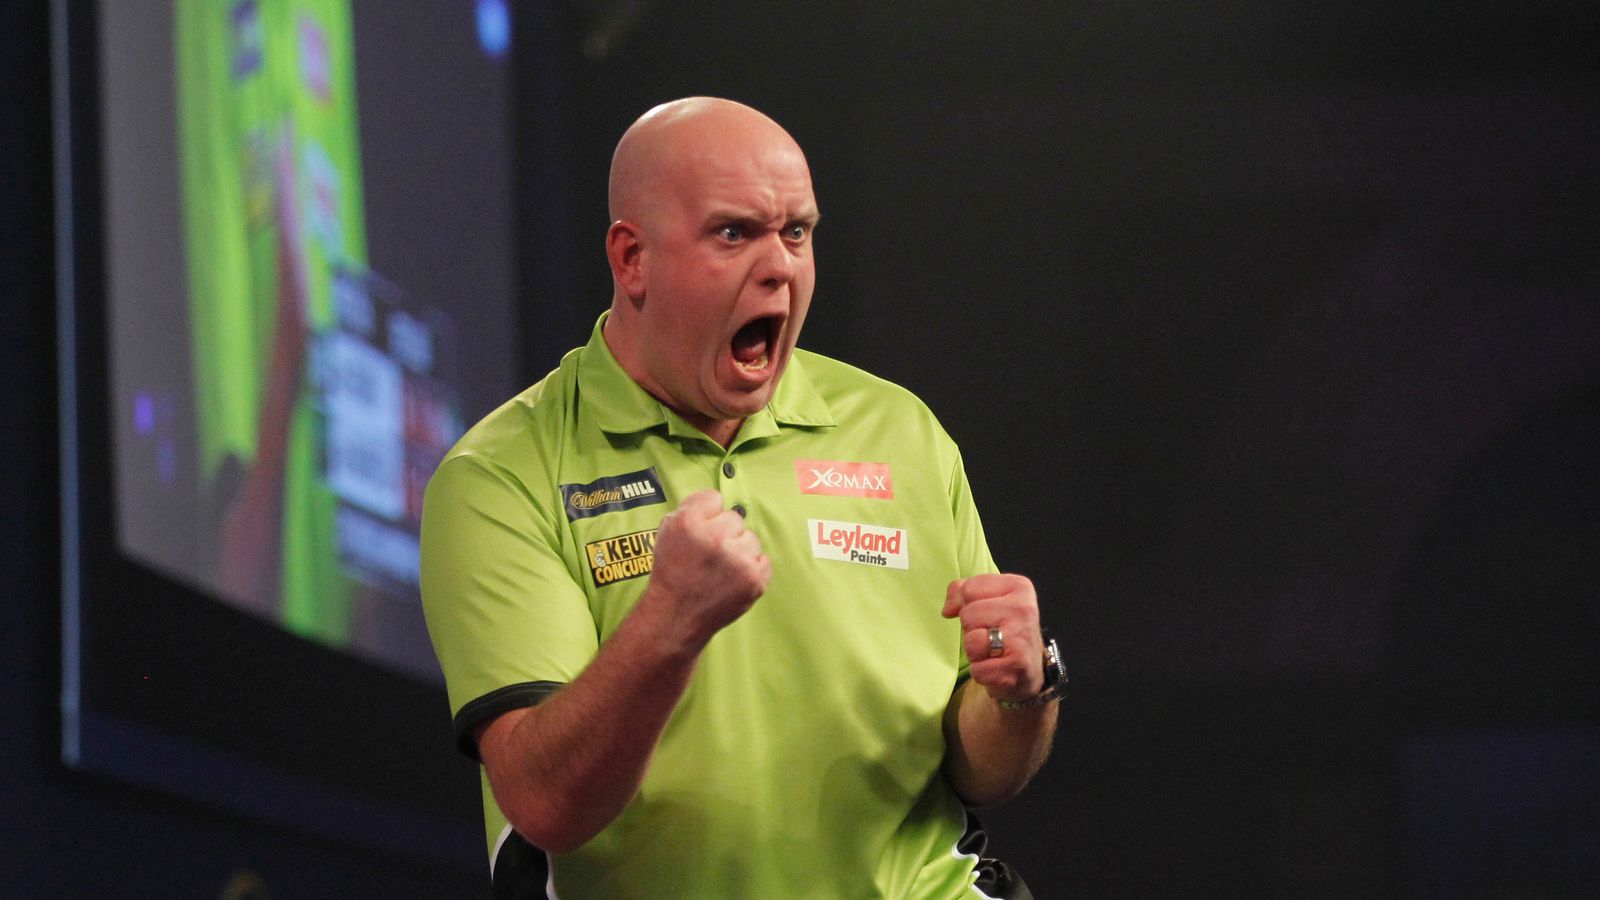 Michael van Gerwen hits two ninedart finishes in one match at UK Open